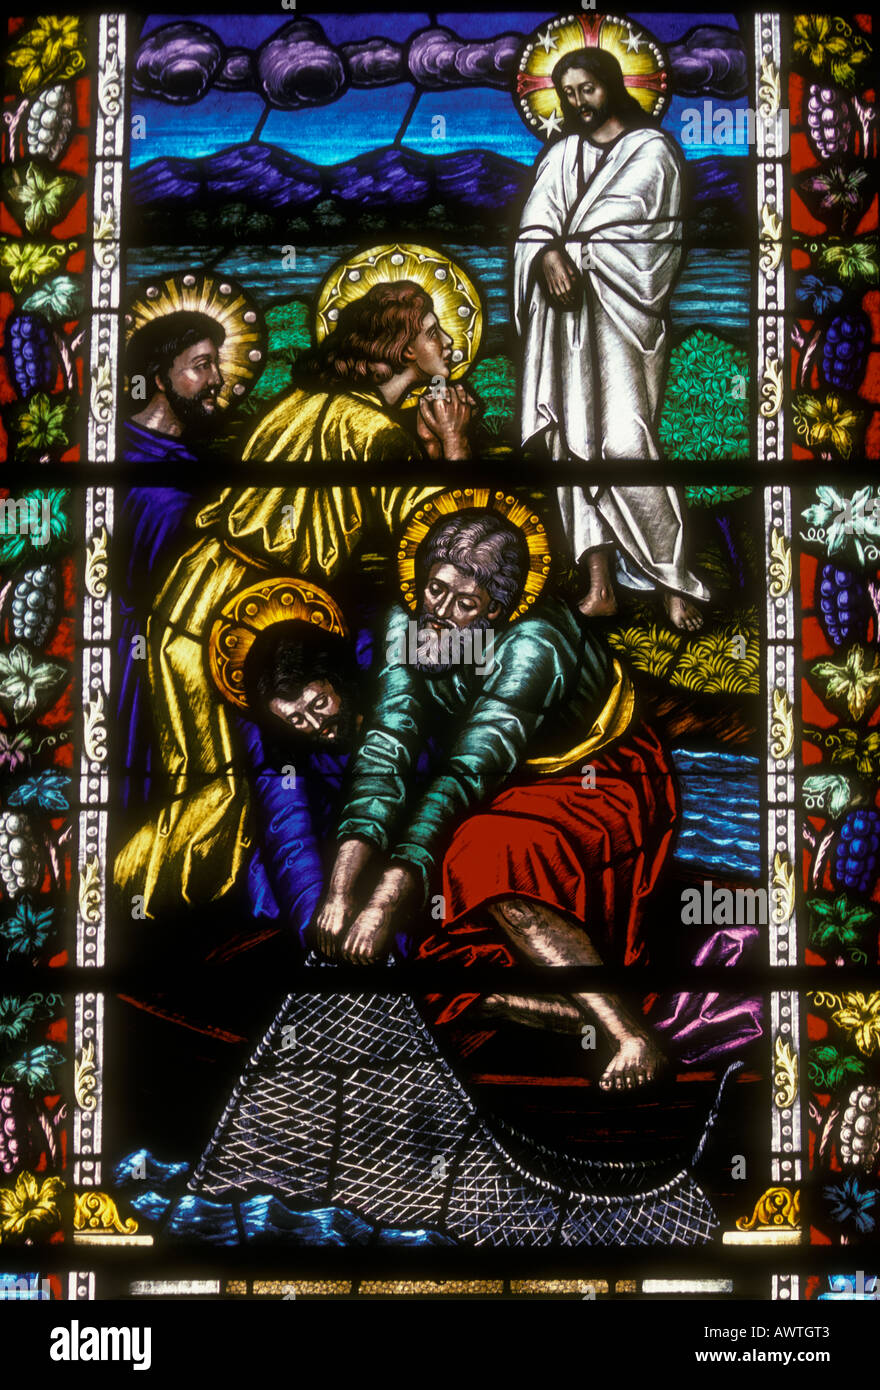 stained glass, stained glass window, The Miraculous Catch of Fish, Jesus and fishermen, San Francisco, California, United States Stock Photo